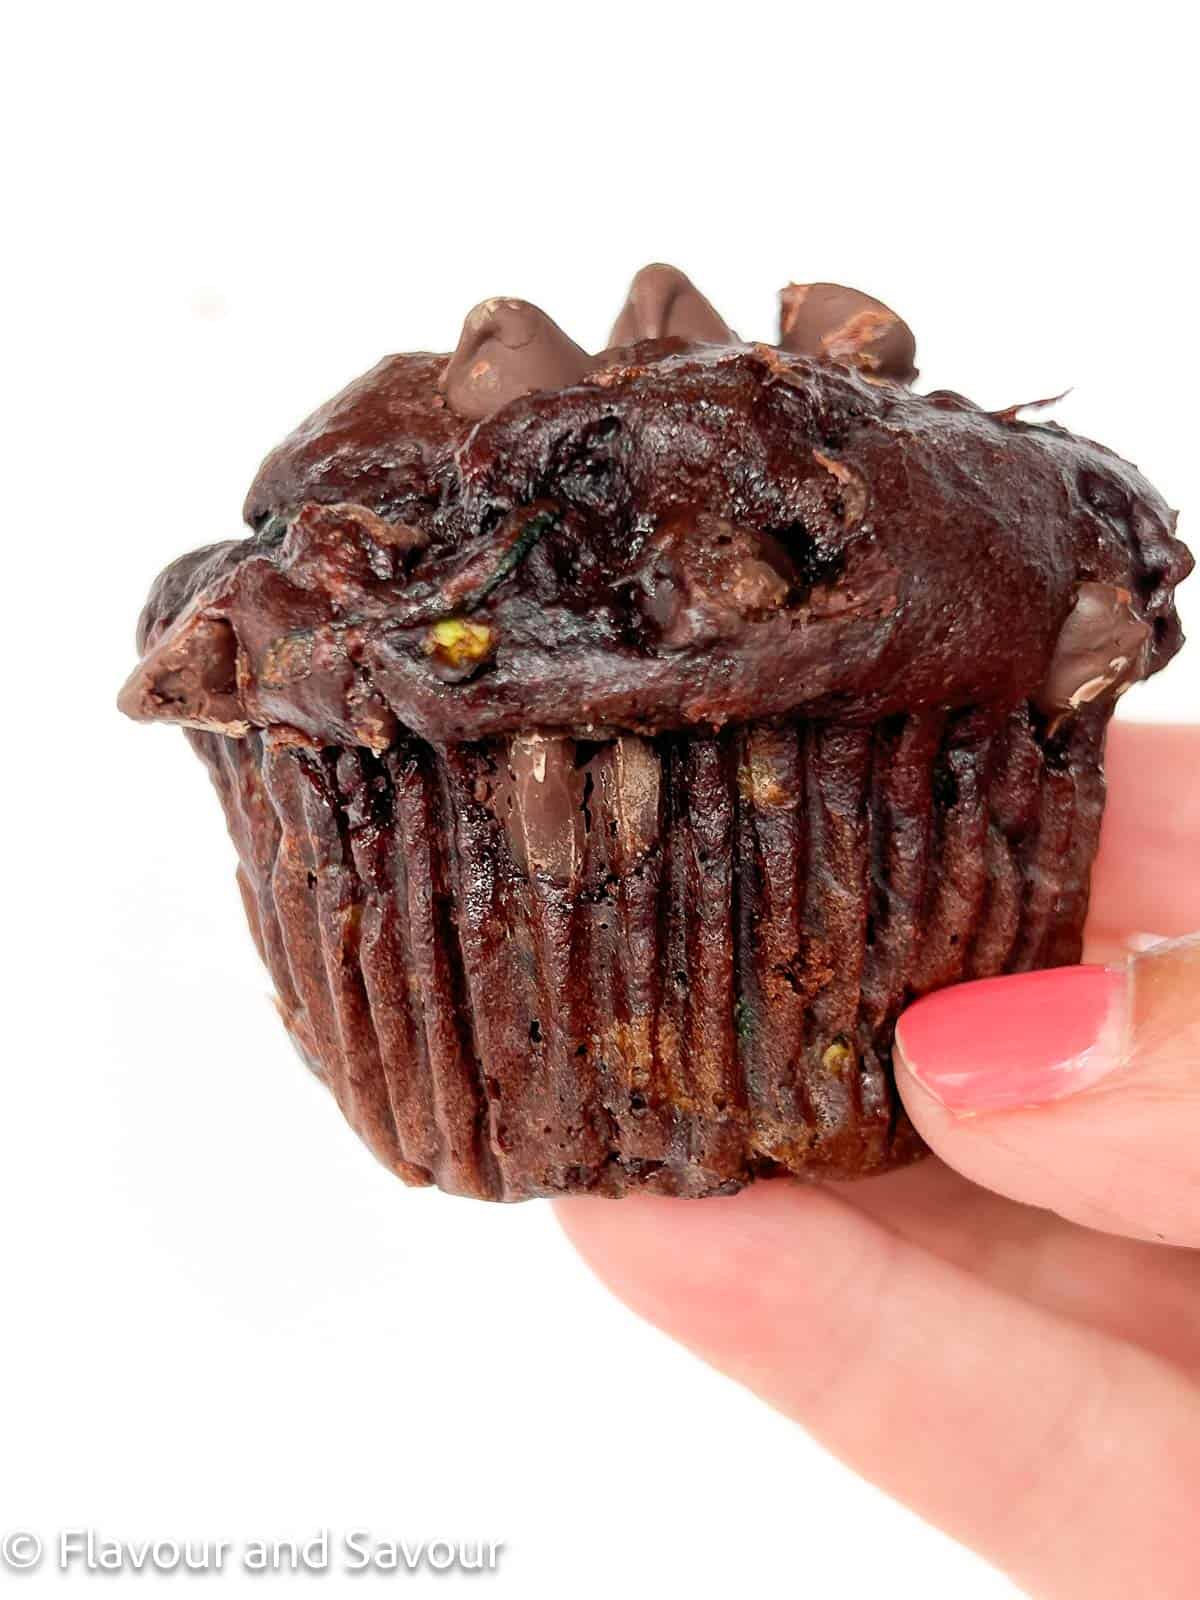 Close up view of a hand holding a single gluten-free double chocolate zucchini muffin.